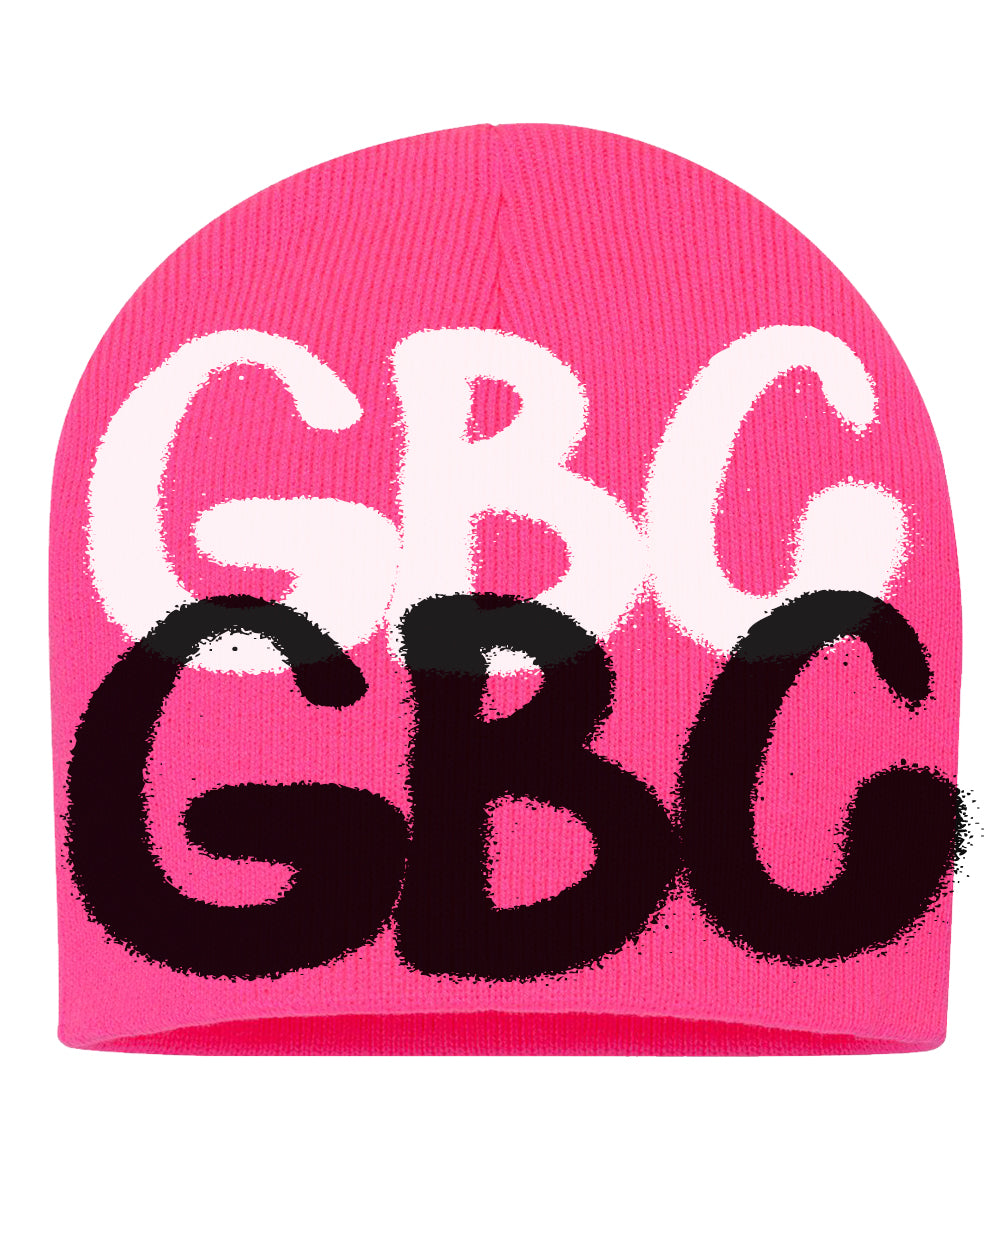 Guy Benson Collection "GBC" Knitted Beanie -Pink/White/Black